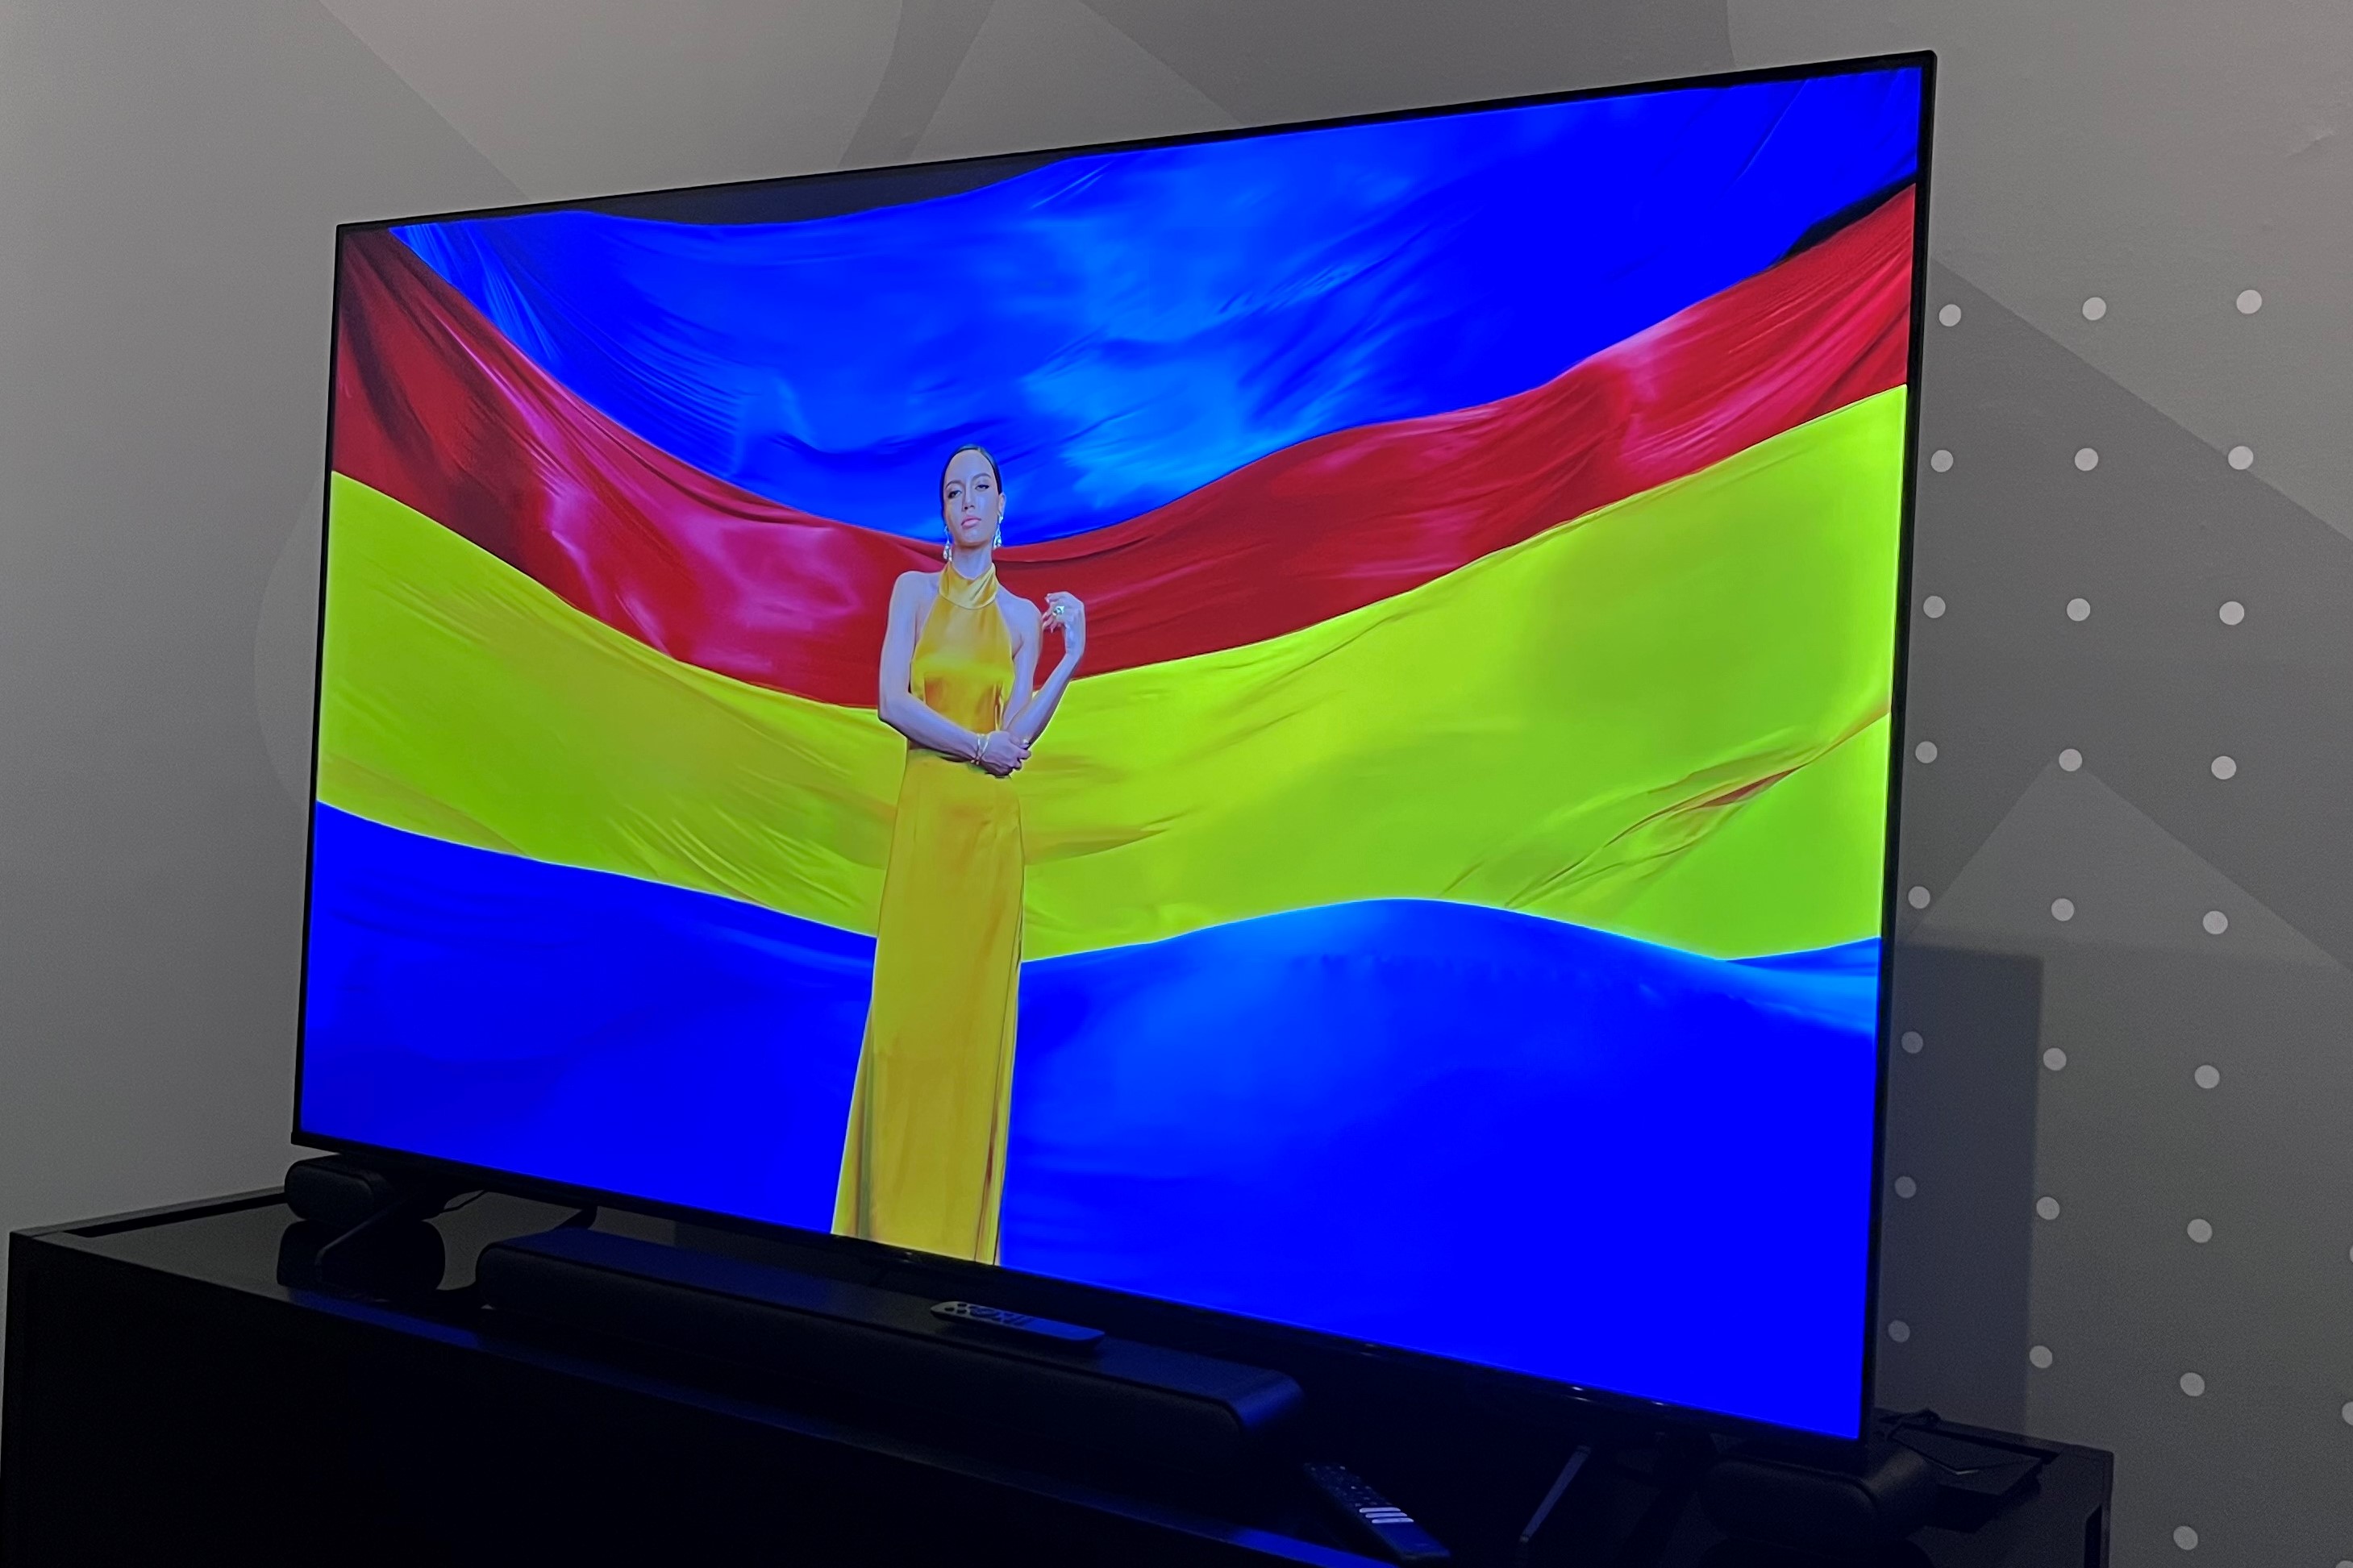 TCL S4 TV showing colorful image